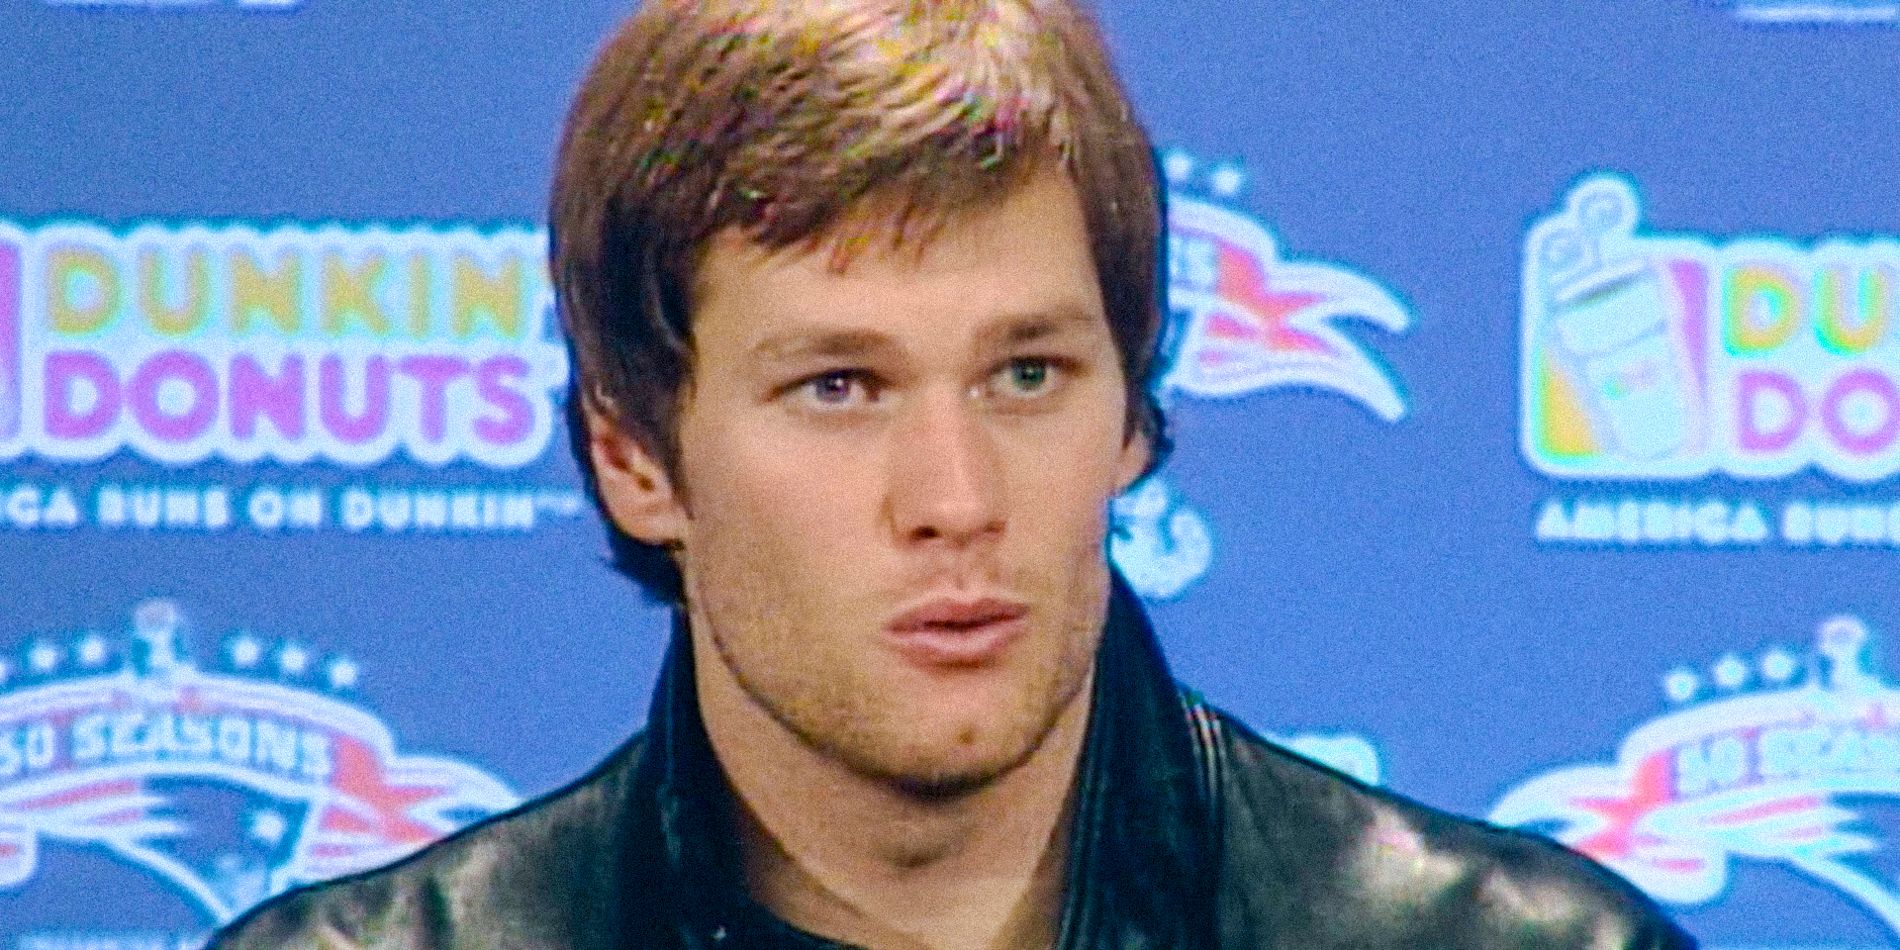 Tom Brady giving an interview in The Dynasty England Patriots